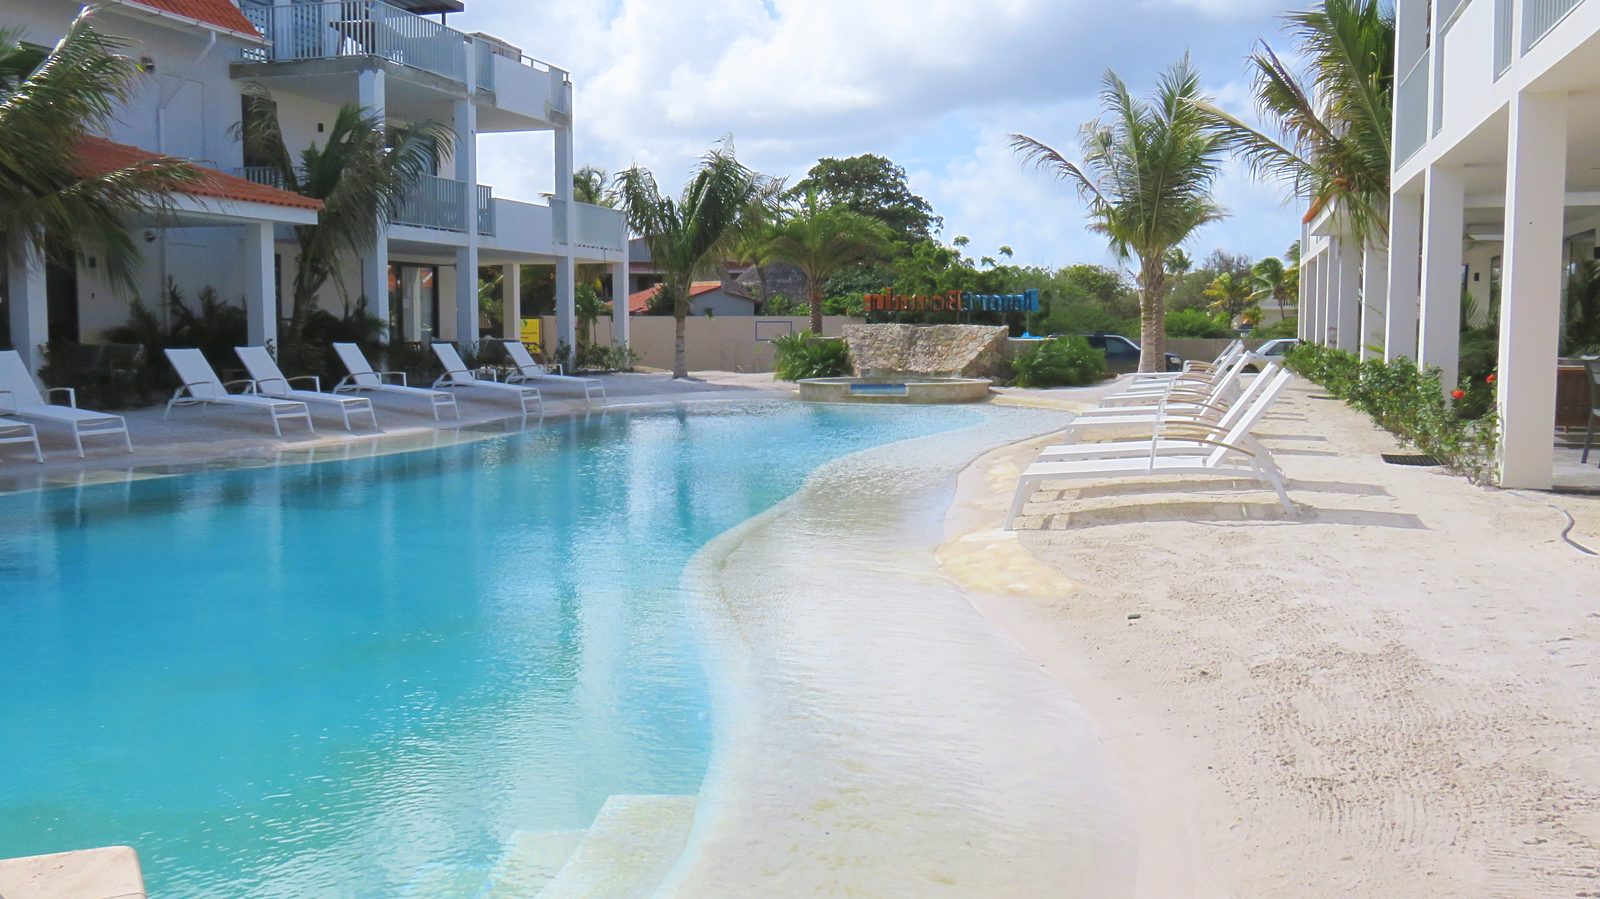 Explore the swimming pool at Resort Bonaire. This beach pool is where you'll be able to relax and enjoy the weather. The kids will have a great time as well.